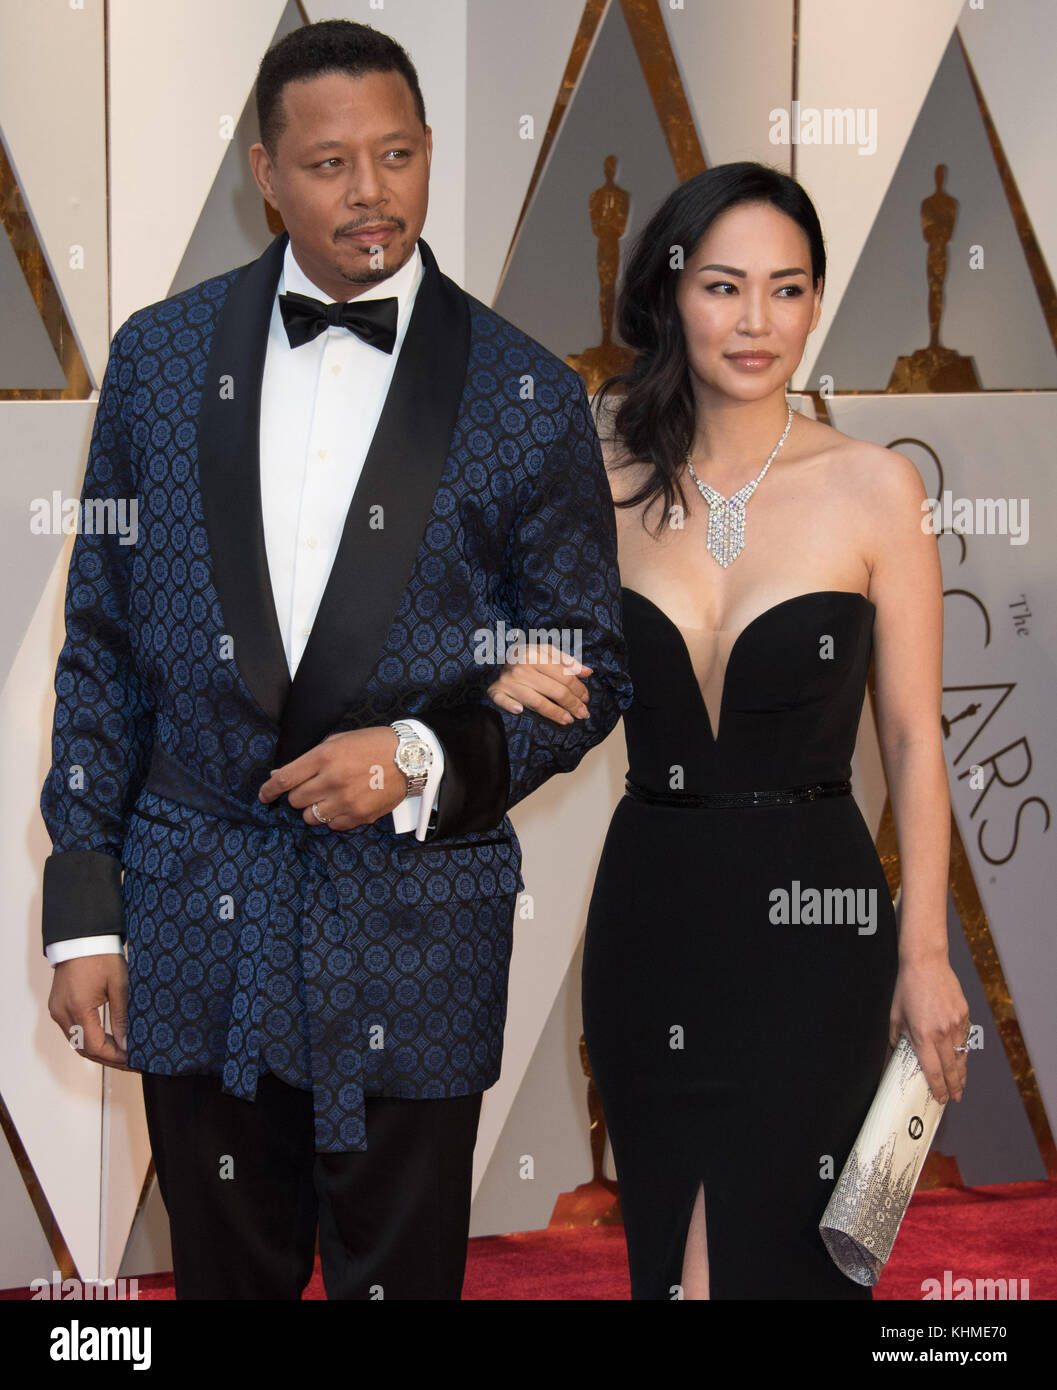 HOLLYWOOD, CA - FEBRUARY 26: Terrence Howard attends the 89th Annual Academy Awards at Hollywood & Highland Center on February 26, 2017 in Hollywood, California  People:  Terrence Howard  Transmission Ref:  MNC Stock Photo